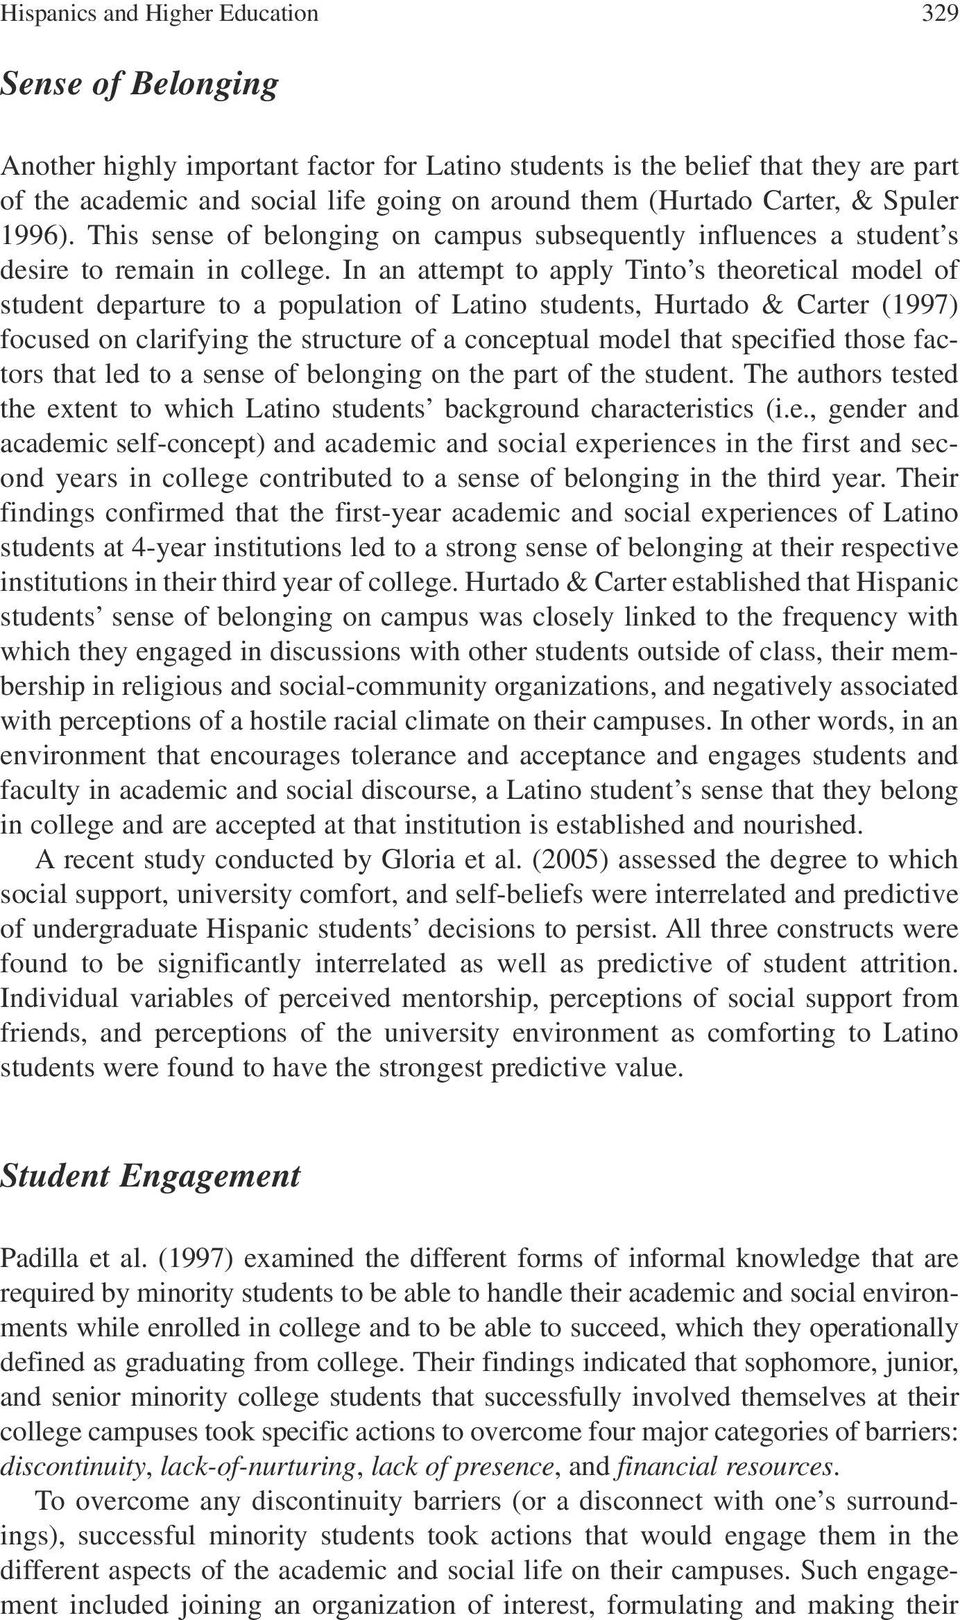 In an attempt to apply Tinto s theoretical model of student departure to a population of Latino students, Hurtado & Carter (1997) focused on clarifying the structure of a conceptual model that